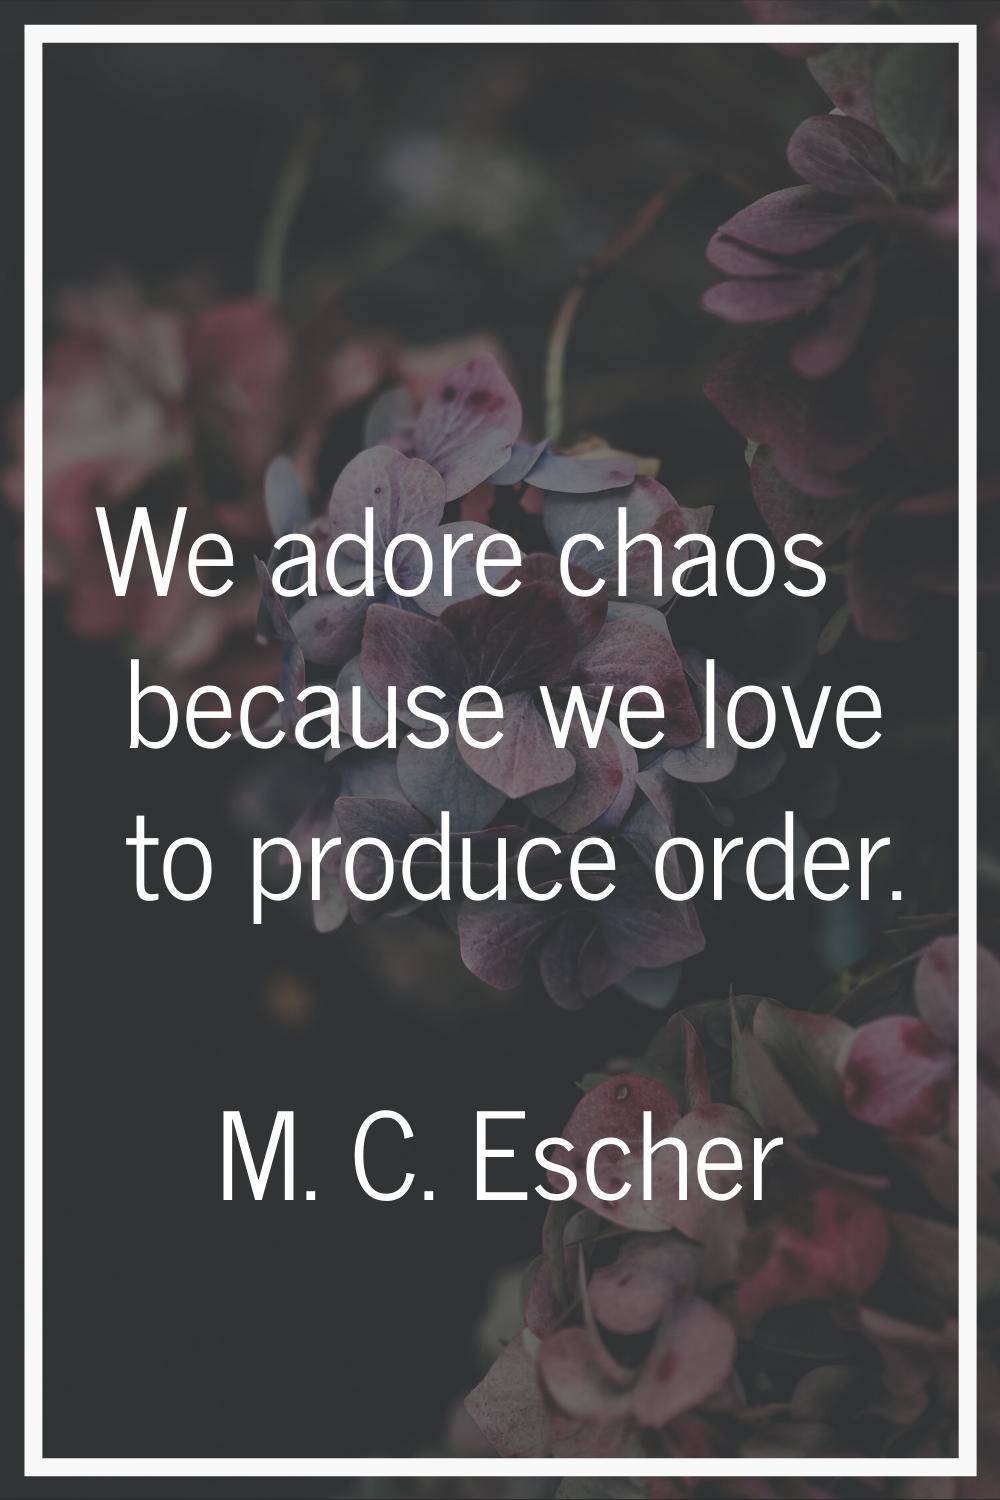 We adore chaos because we love to produce order.